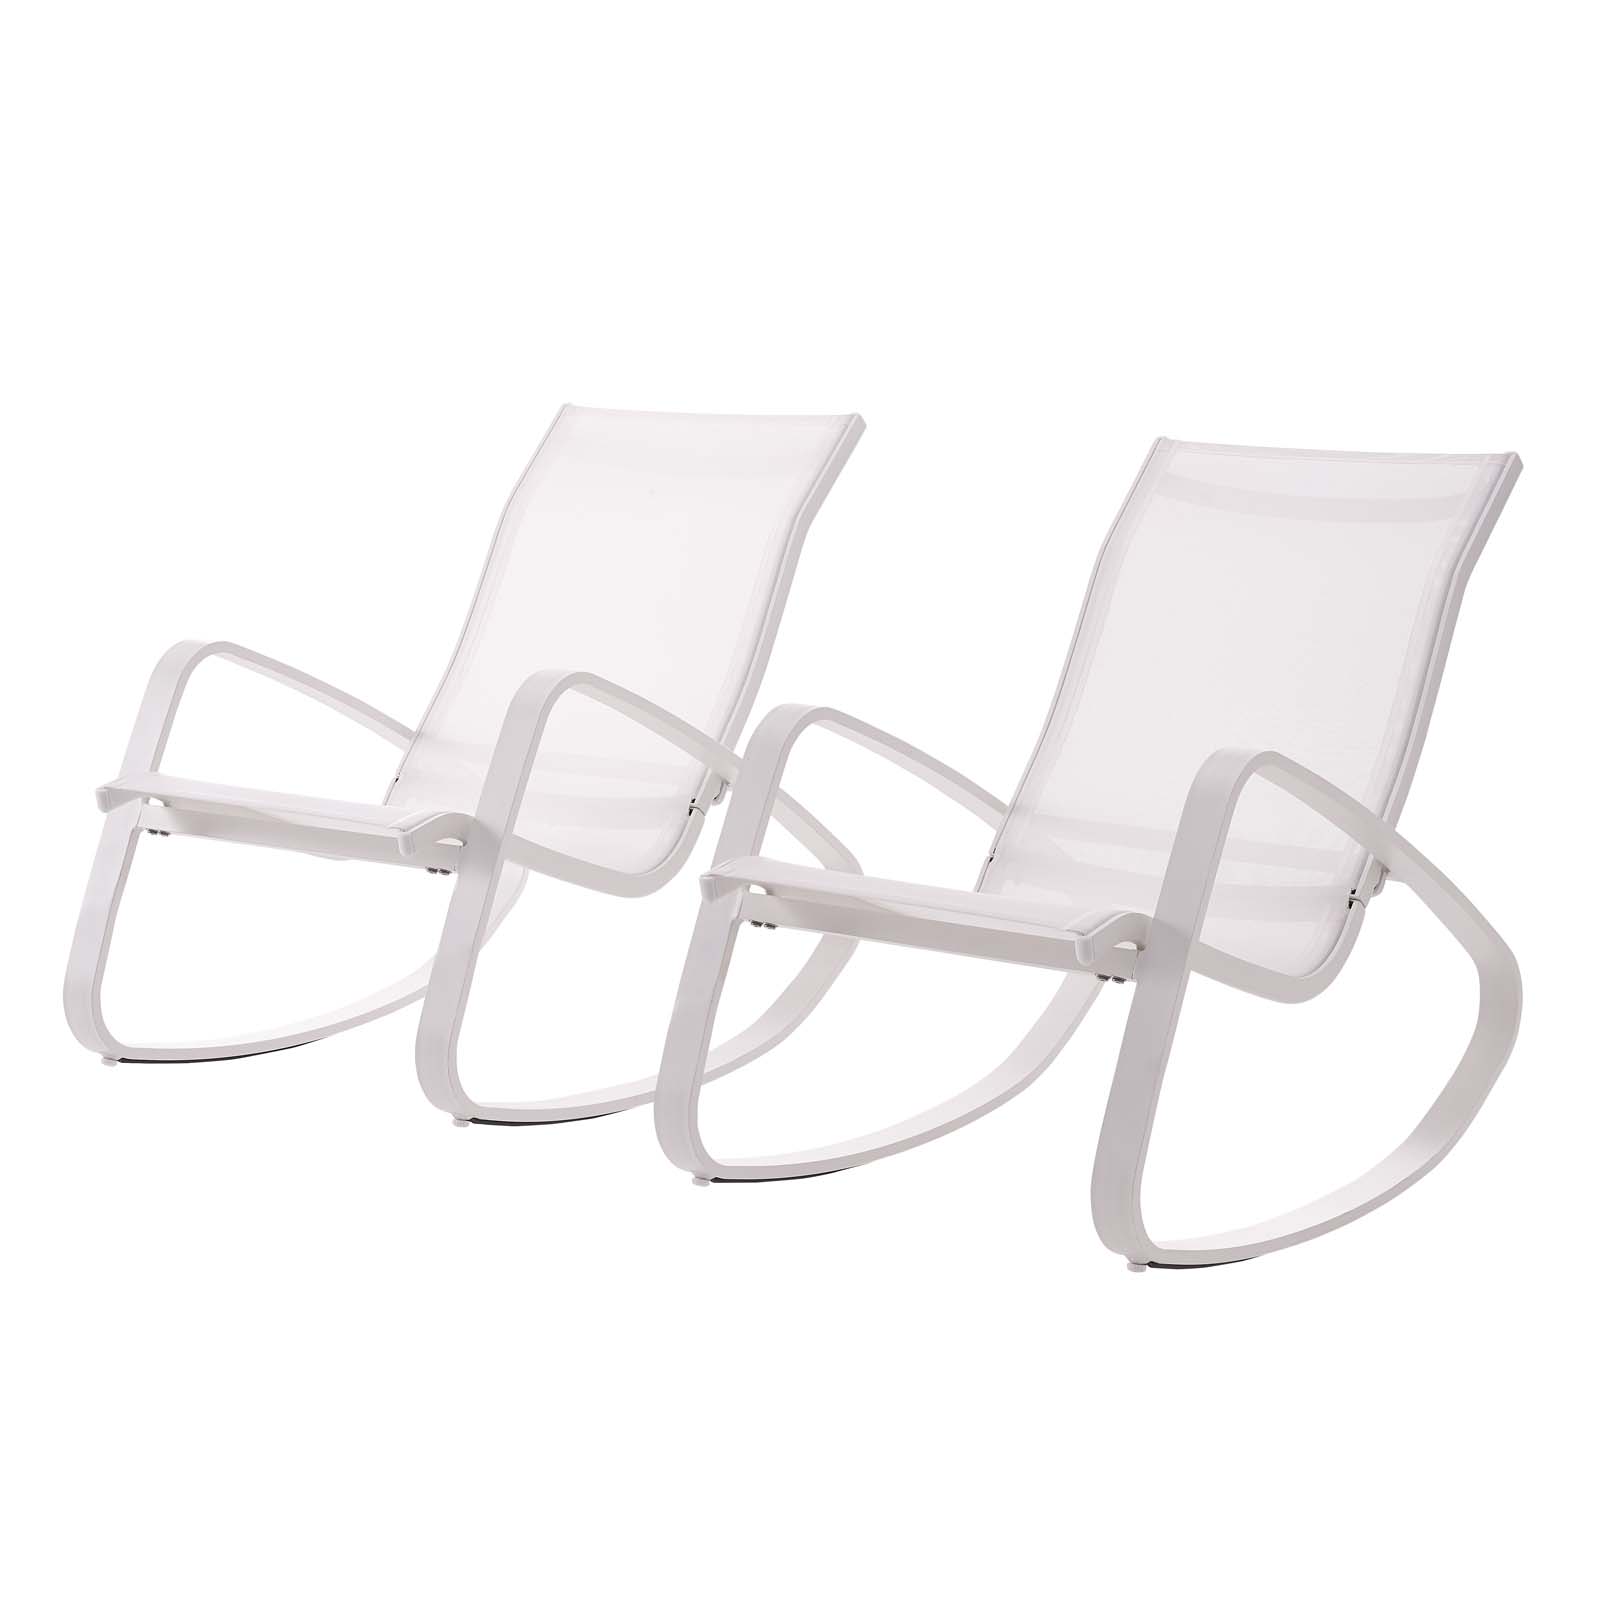 Modern Contemporary Urban Design Outdoor Patio Balcony Garden Furniture Lounge Chair Set, Set of Two, Aluminum Metal Steel, White - image 1 of 6